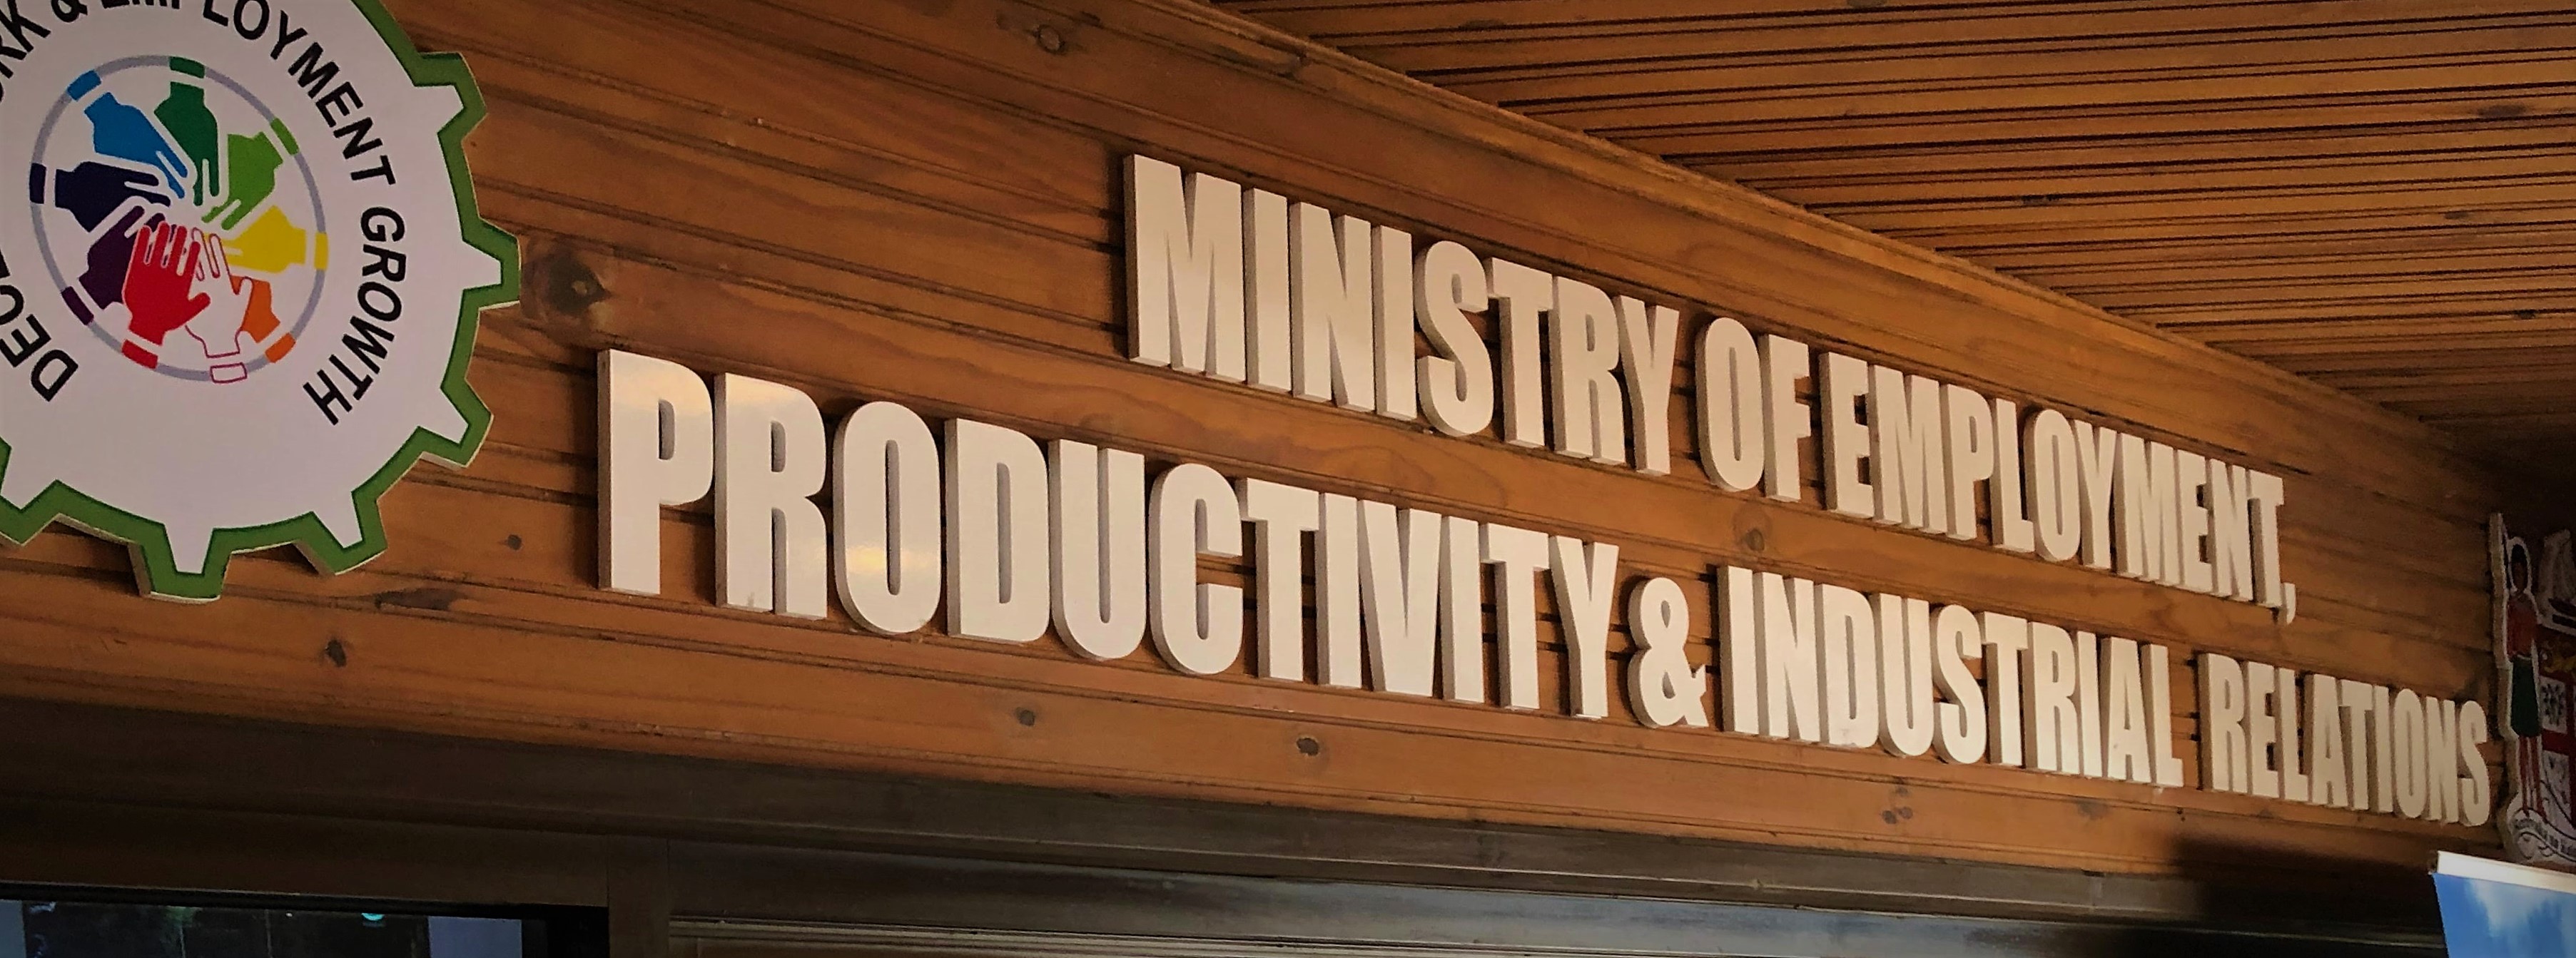 Ministry of employment